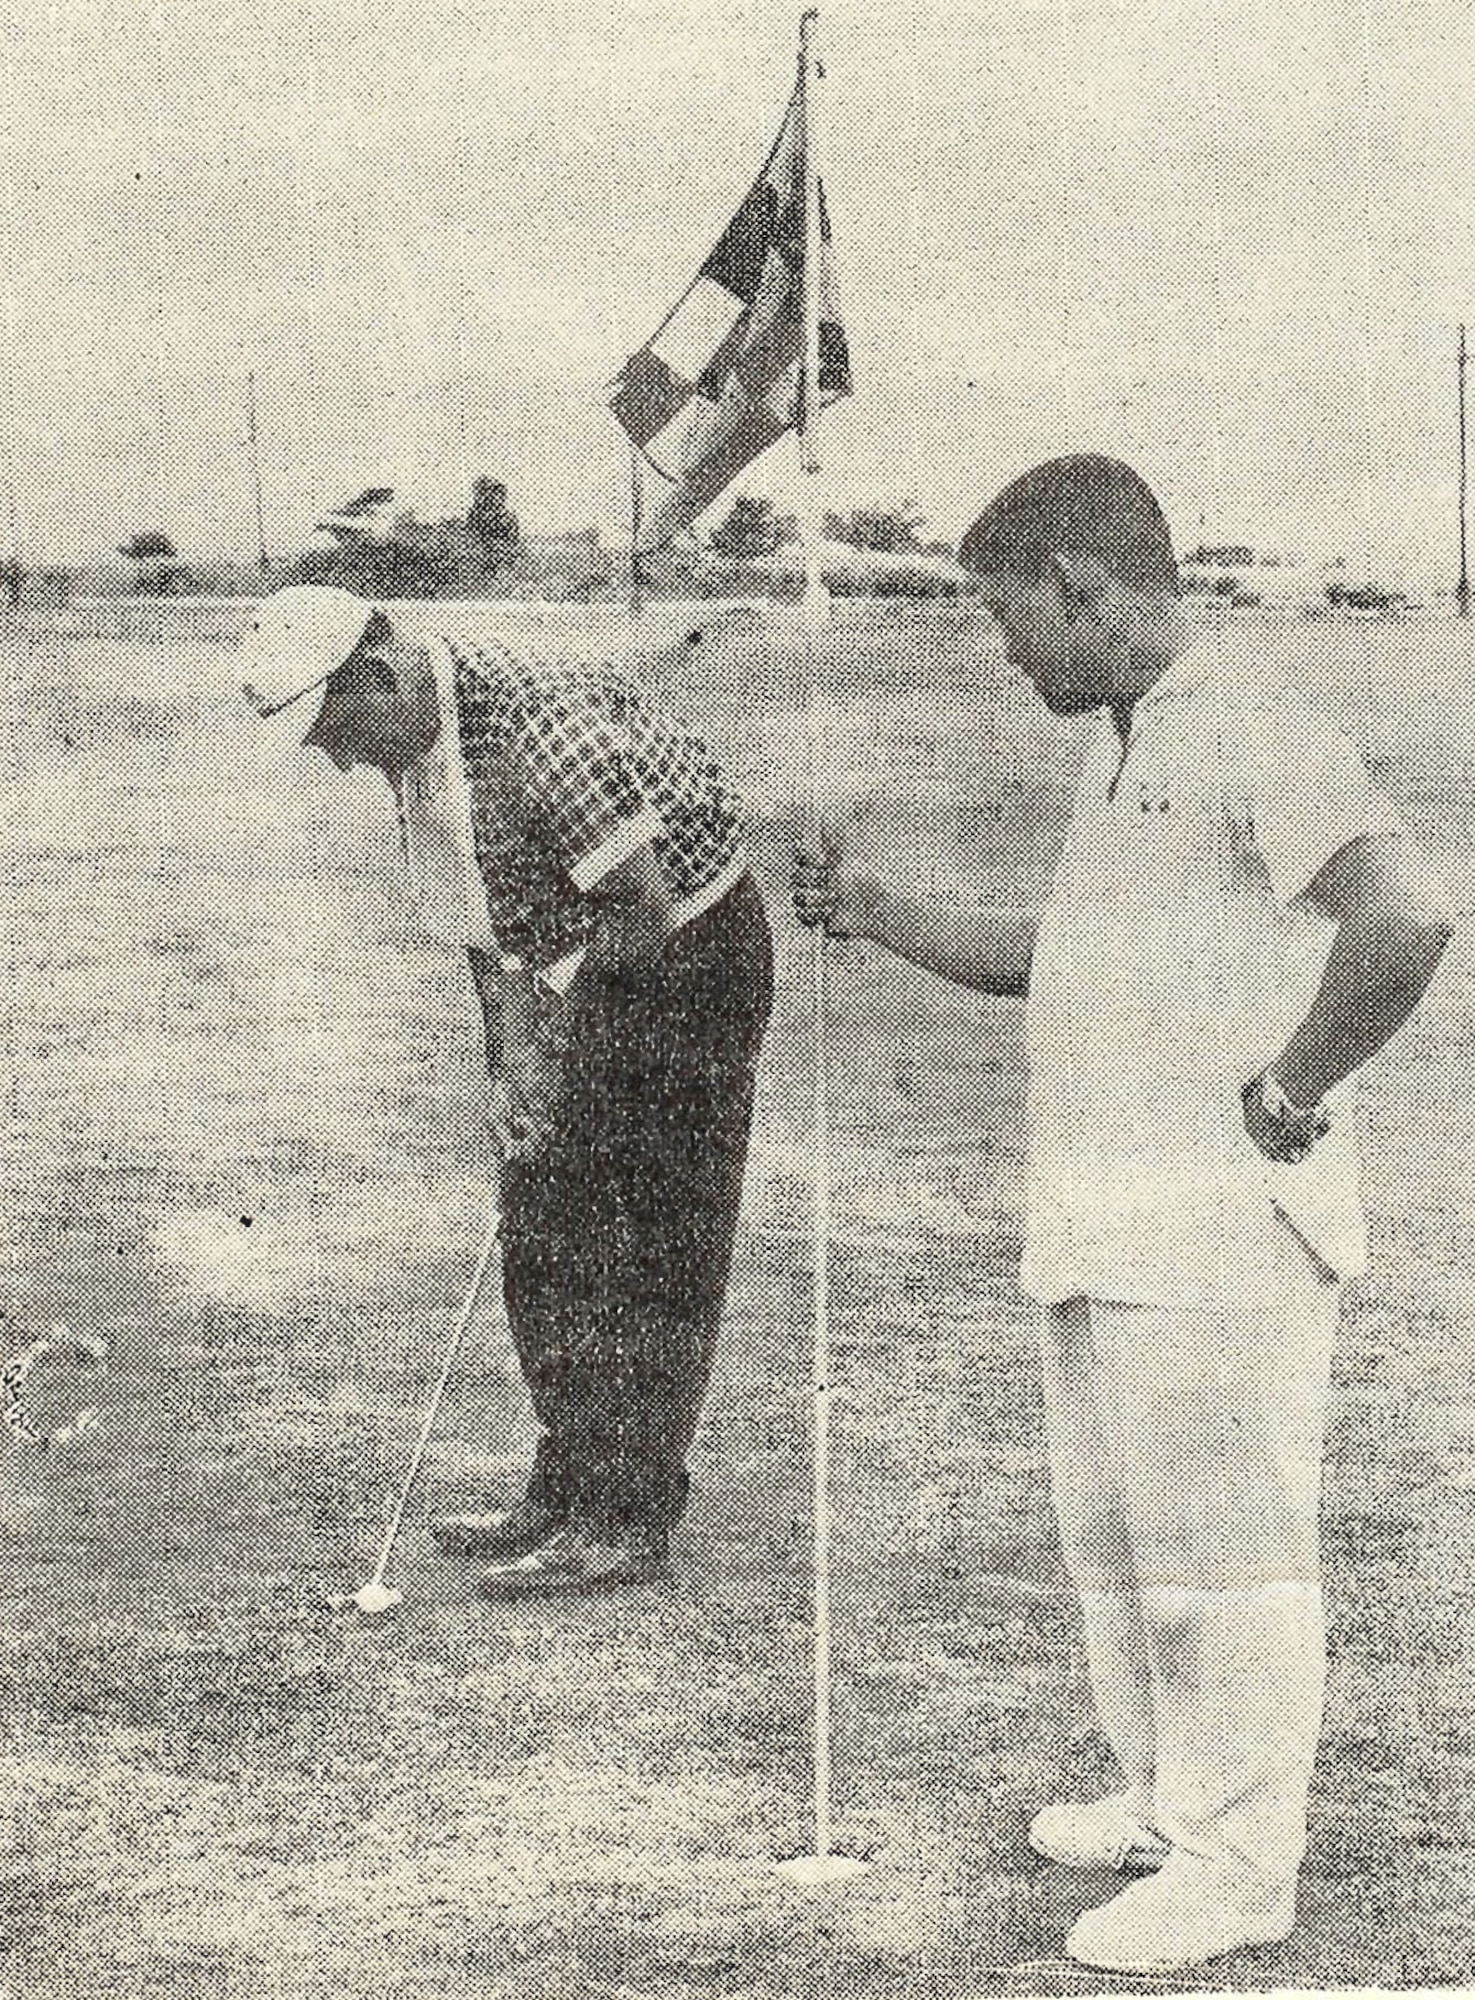 Tatsuo “Jimmy” Schwartz holds a flag for a golfer at Kadena Air Base, Japan. Shwartz has donated more than 3,300 trees to Kadena over the course of his more than 50 years of service to the U.S. military. (courtesy photo)